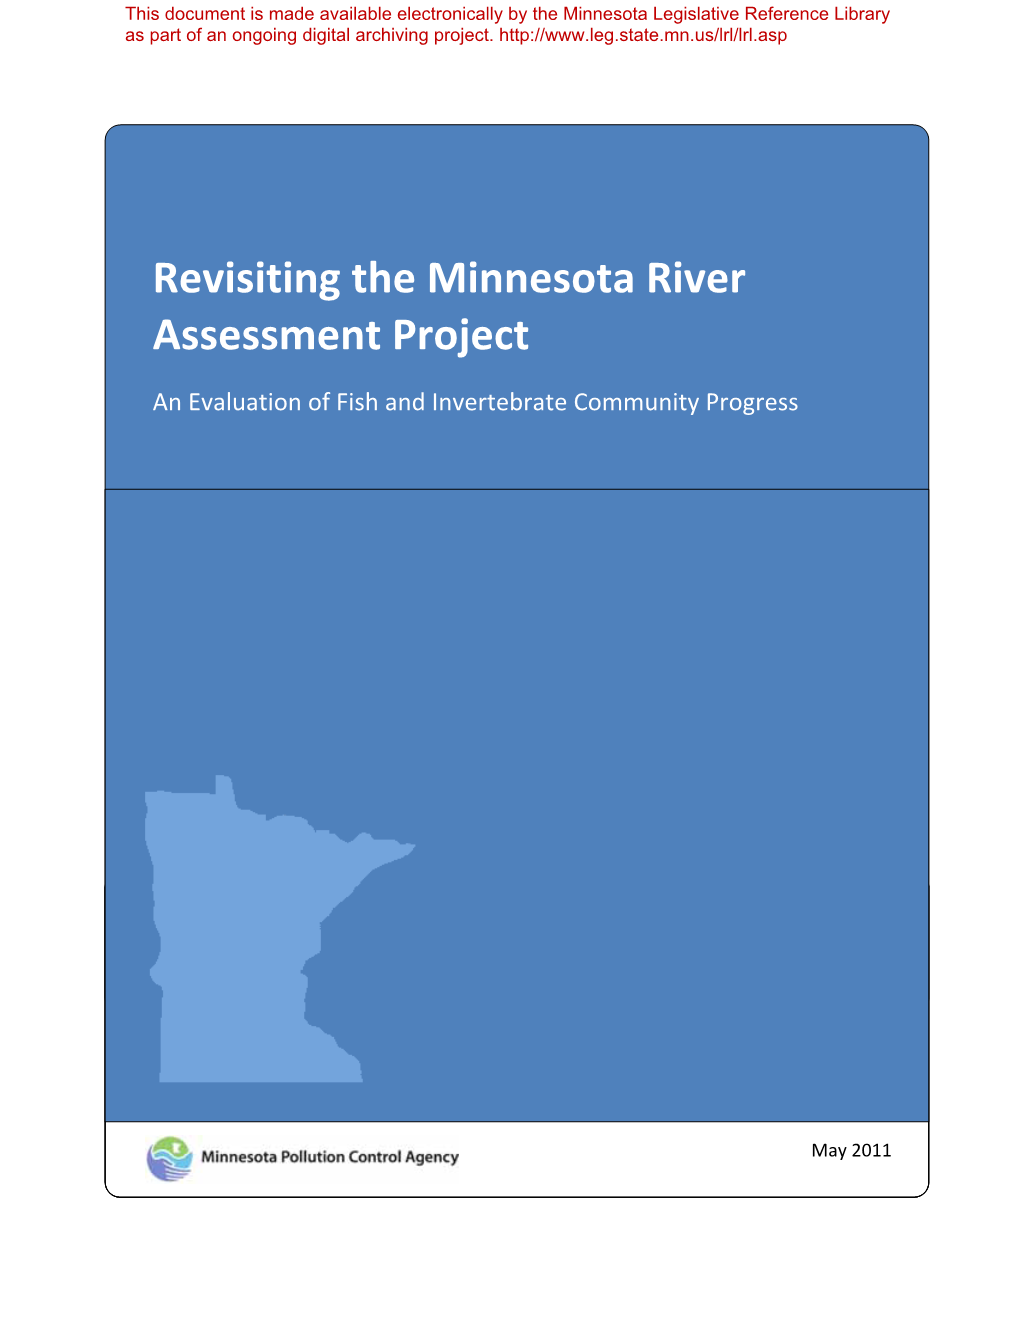 Revisiting the Minnesota River Assessment Project: an Evaluation Of